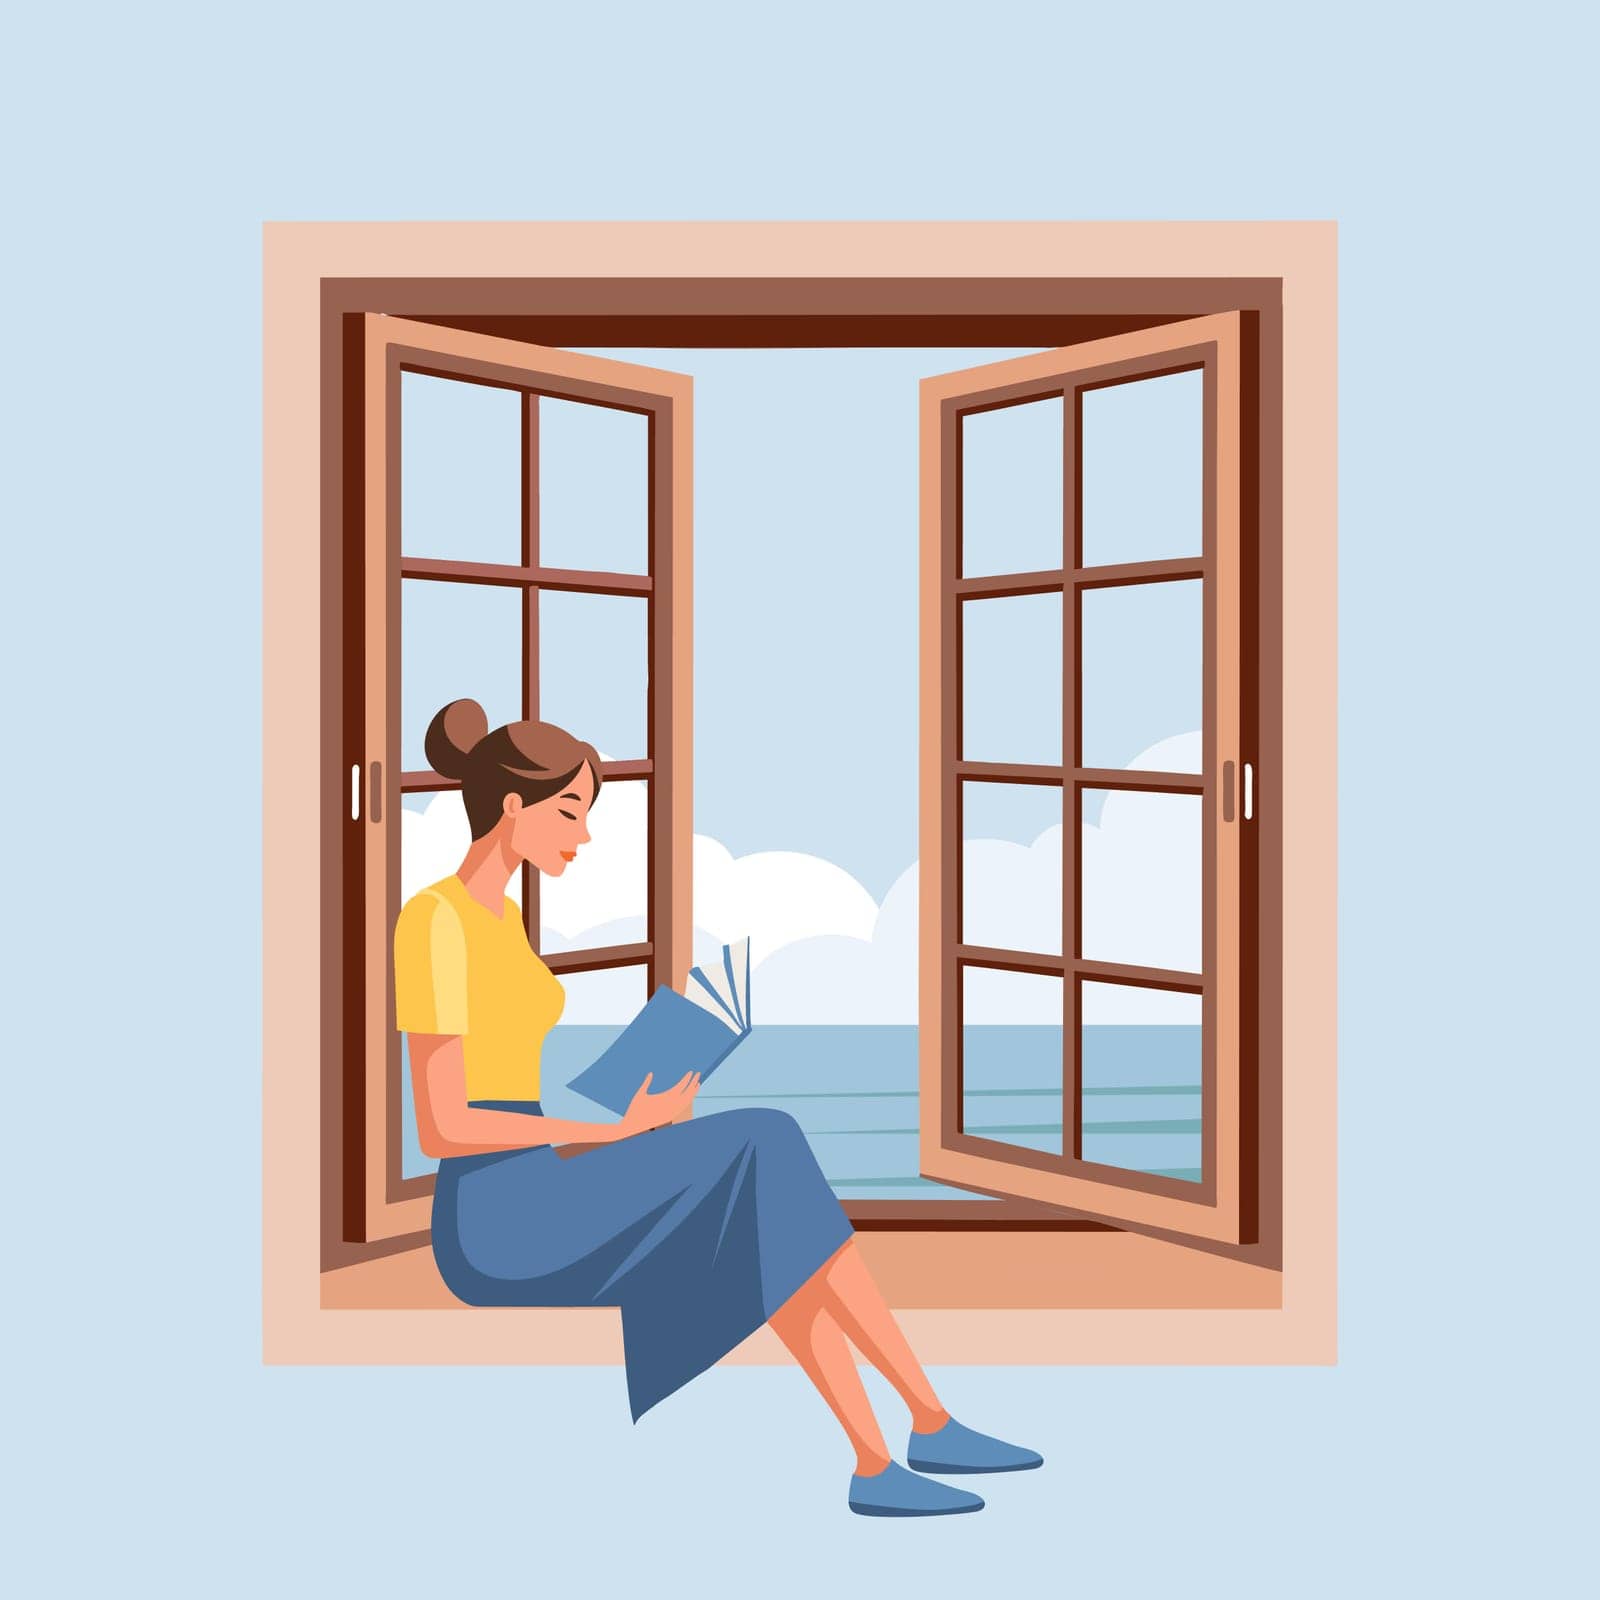 A cute woman is reading a book while sitting near an open window with a landscape. Illustration for a bookstore. by VS1959